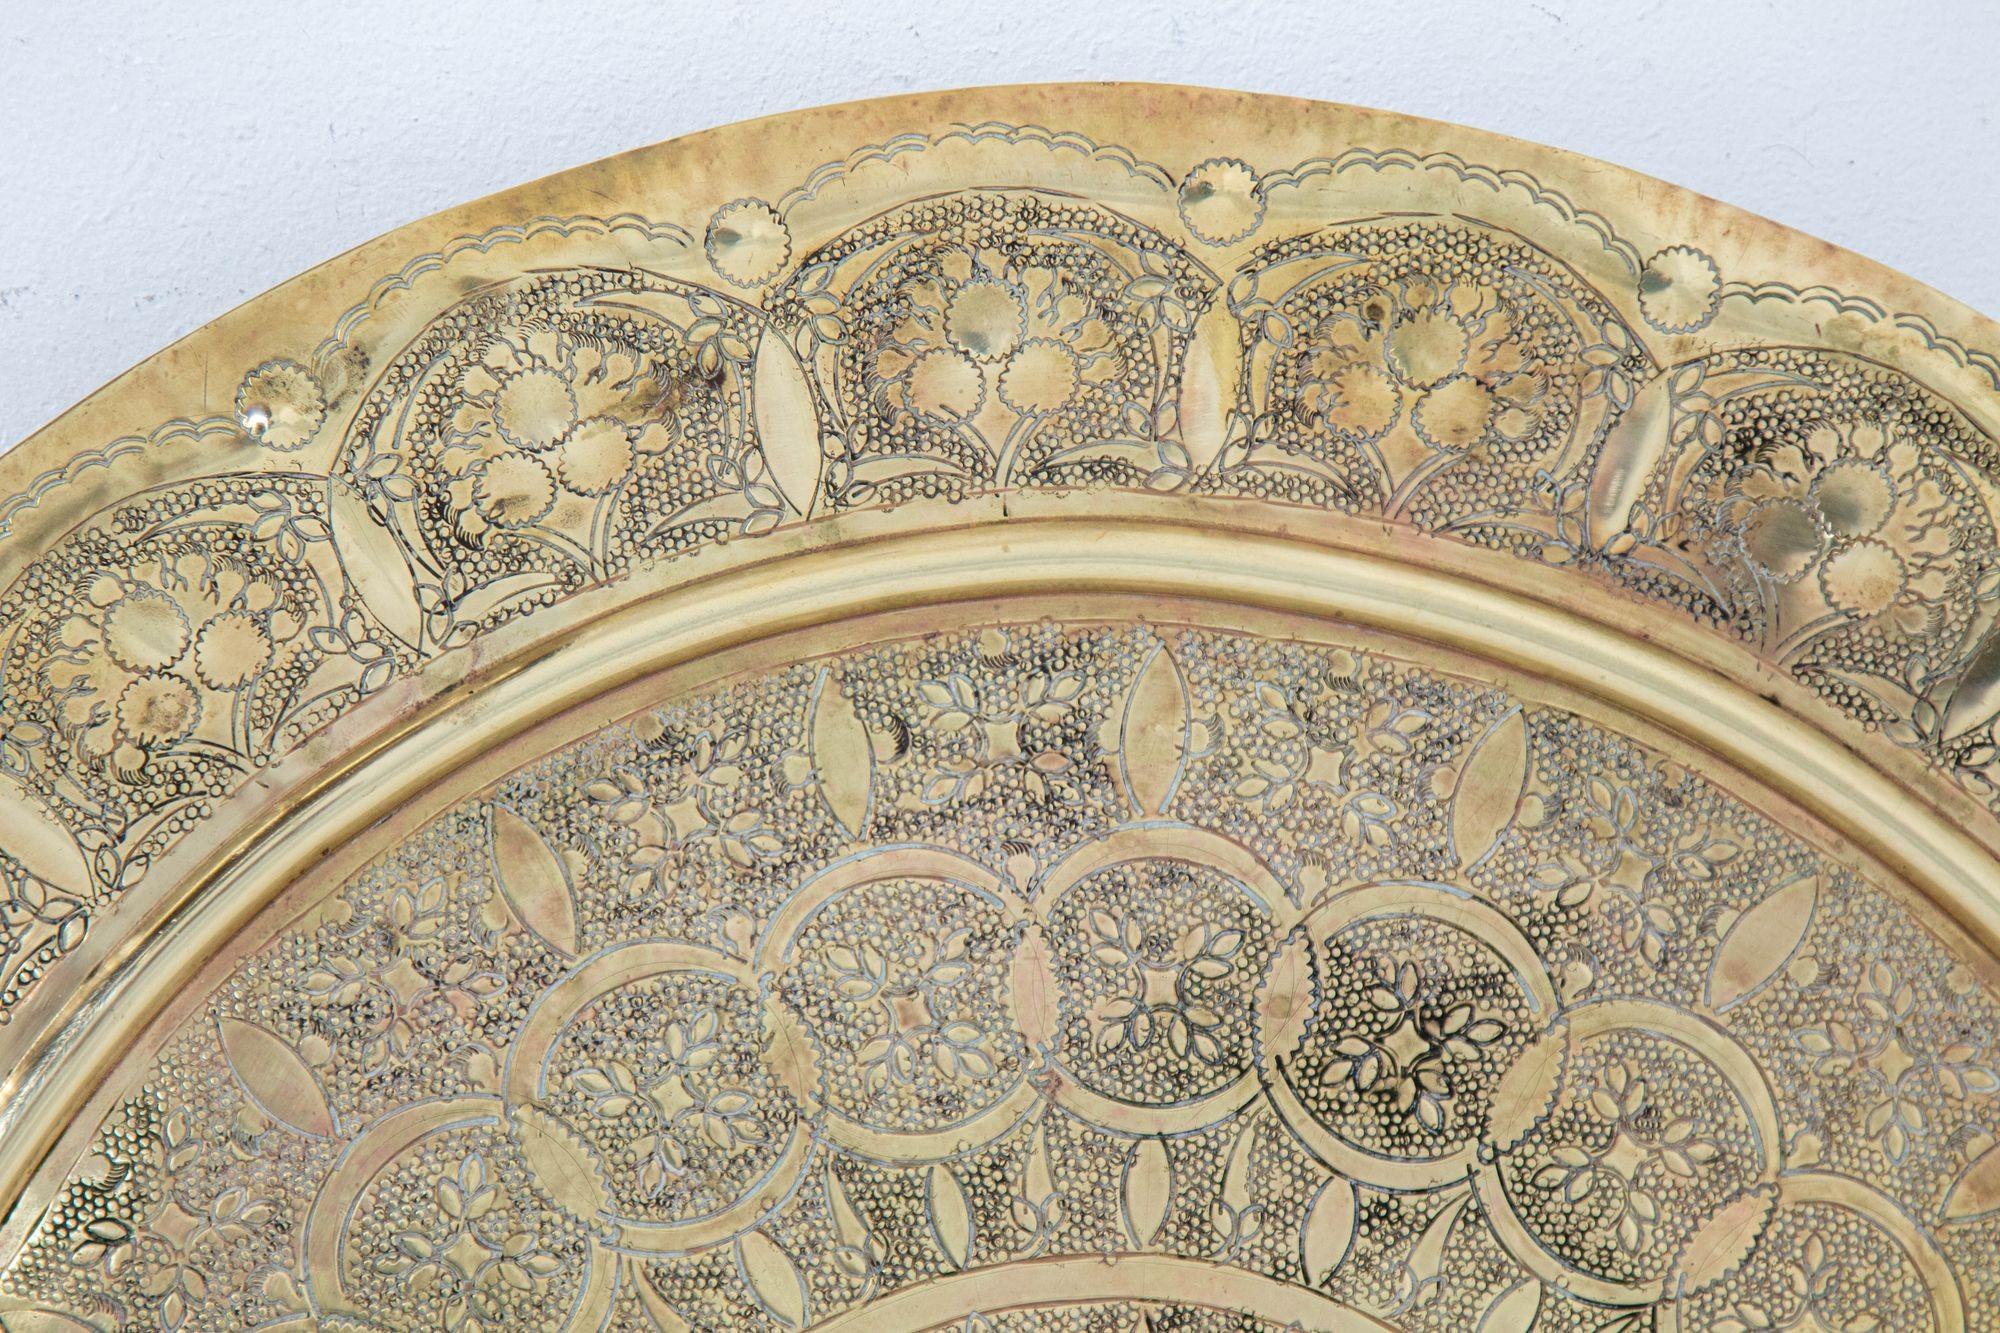 Hand-Carved 1930s Middle Eastern Round Brass Tray 23.5 in. Diameter For Sale